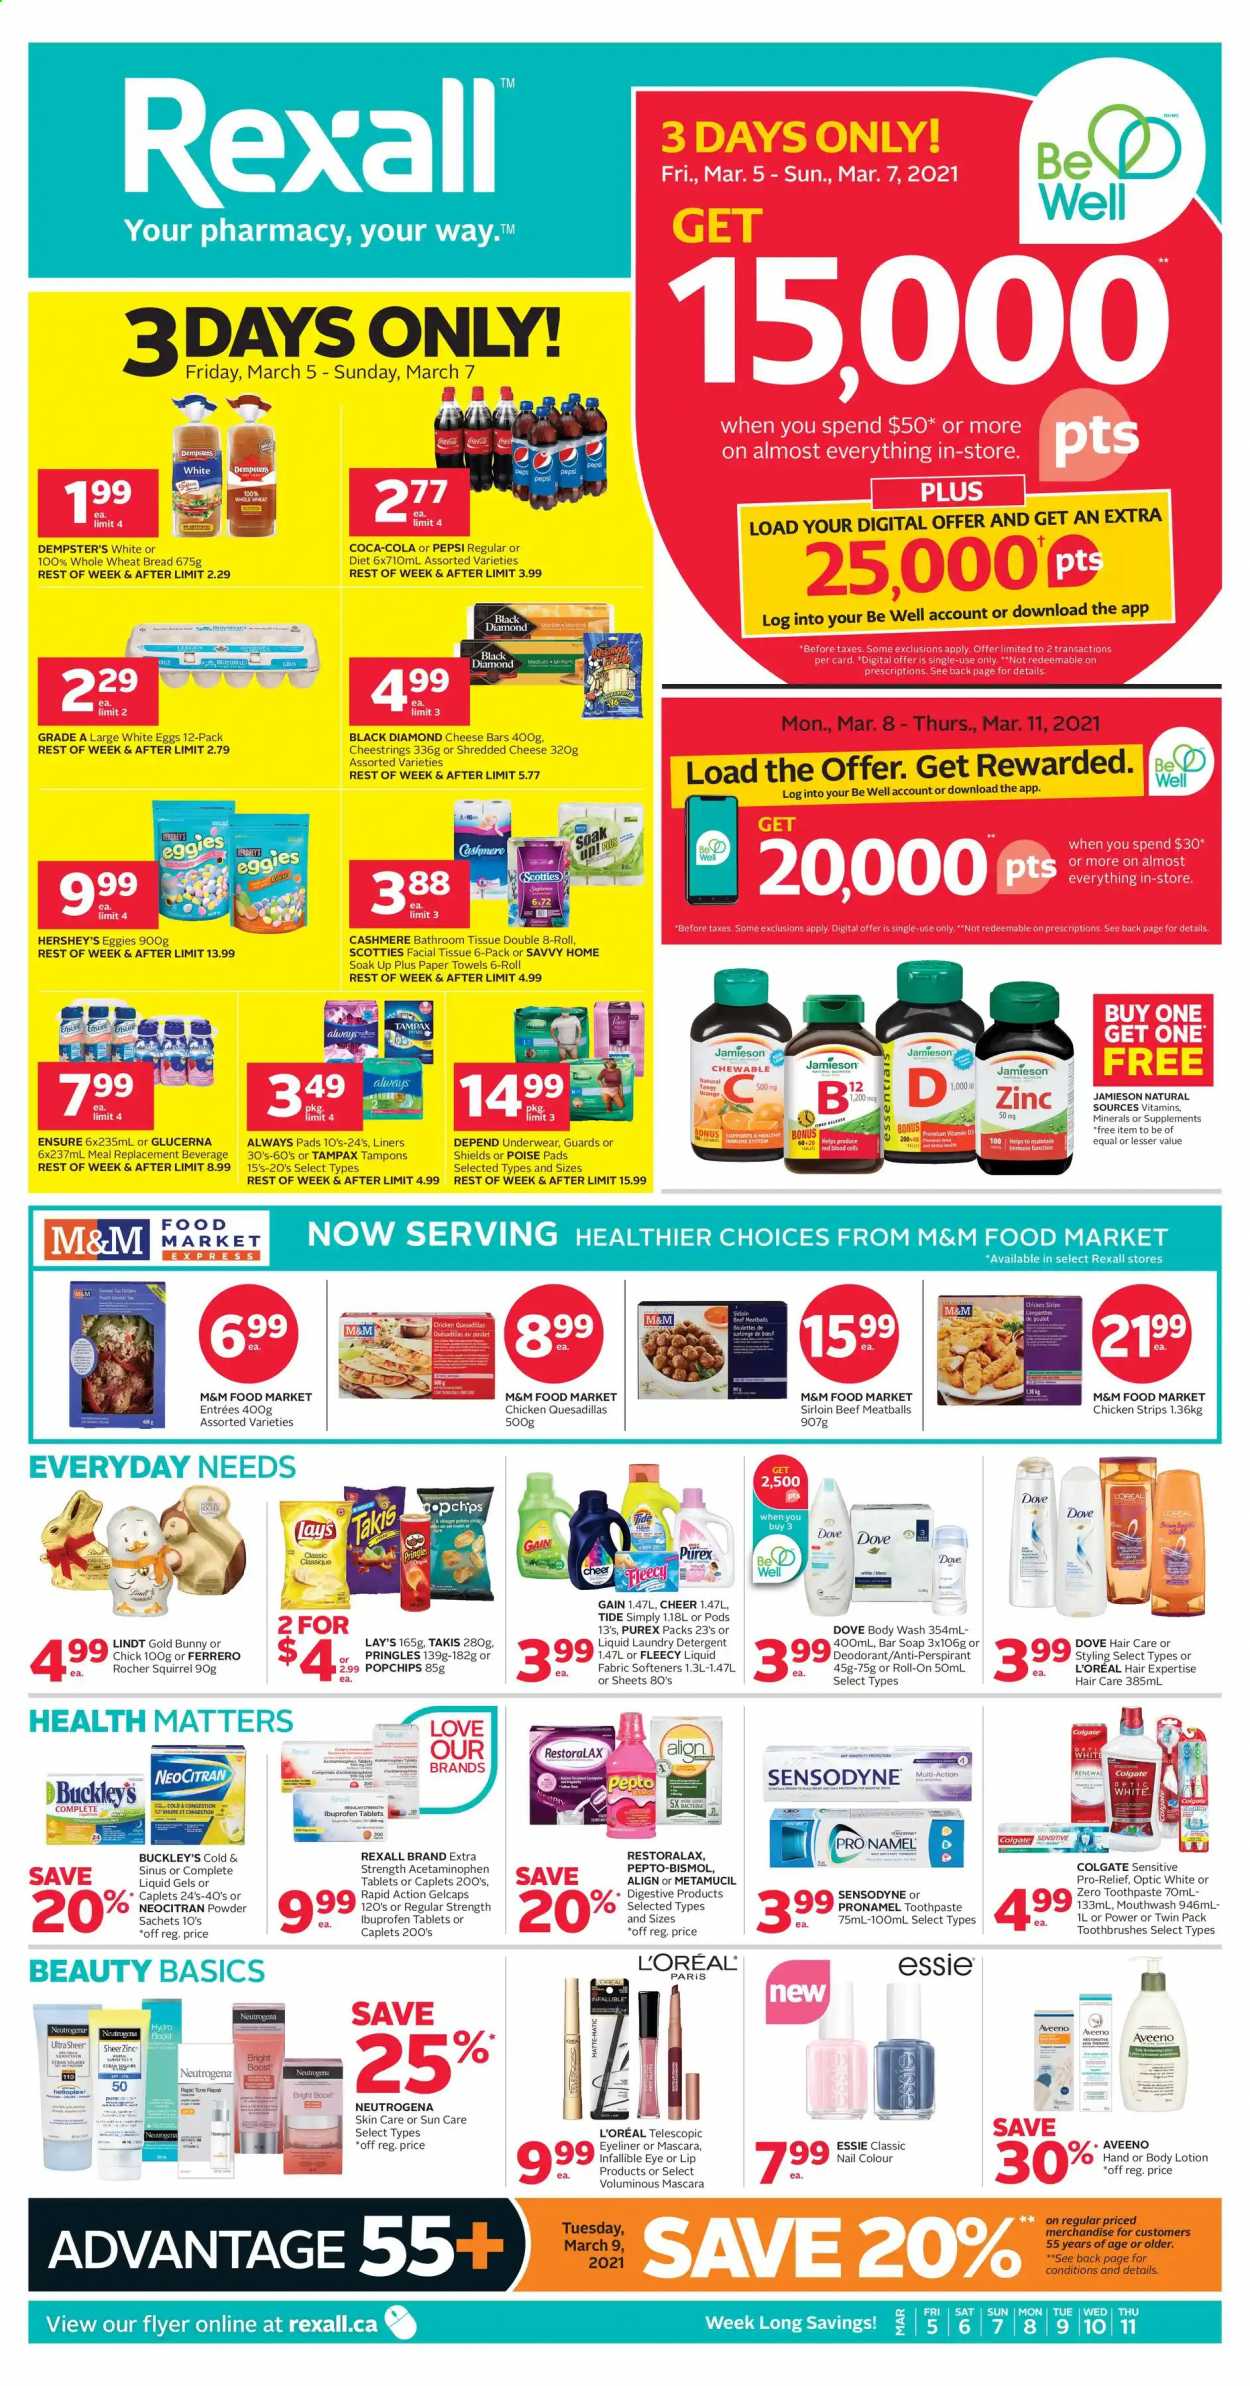 thumbnail - Rexall Flyer - March 05, 2021 - March 11, 2021 - Sales products - Hershey's, Pringles, Lay’s, Coca-Cola, Pepsi, Boost, Aveeno, bath tissue, kitchen towels, paper towels, Gain, Tide, laundry detergent, Purex, body wash, soap bar, soap, toothpaste, mouthwash, Always pads, tampons, L’Oréal, body lotion, anti-perspirant, roll-on, eyeliner, Ibuprofen, Pepto-bismol, Glucerna, zinc, Metamucil, mascara, Neutrogena, Tampax, Sensodyne, M&M's, deodorant. Page 1.